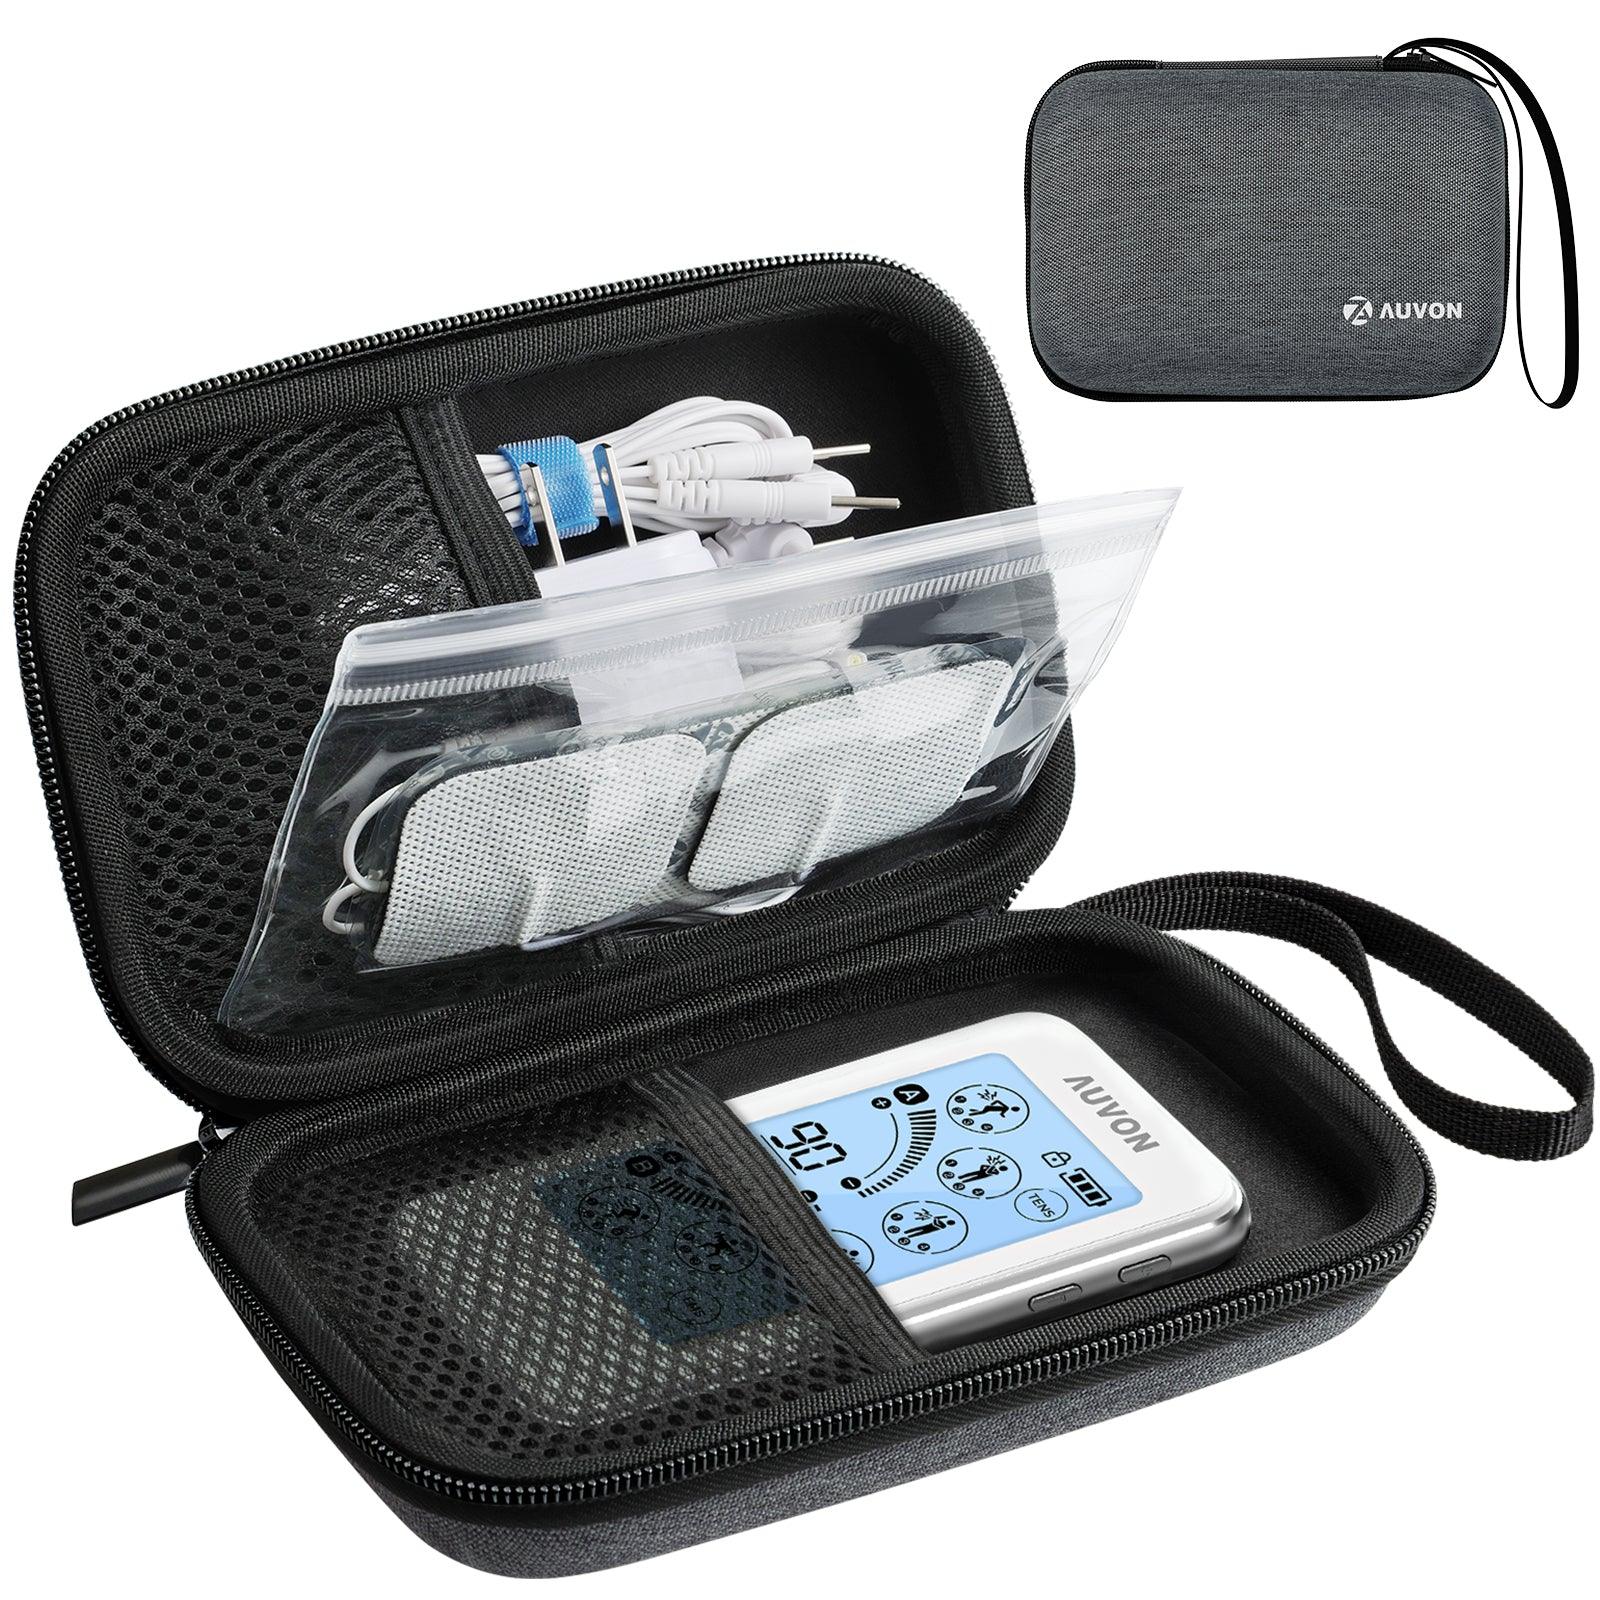 New Arm Blood Pressure Monitor Storage Bag Portable Shockproof Waterproof  EVA Carry Hard Case Pouch Medical